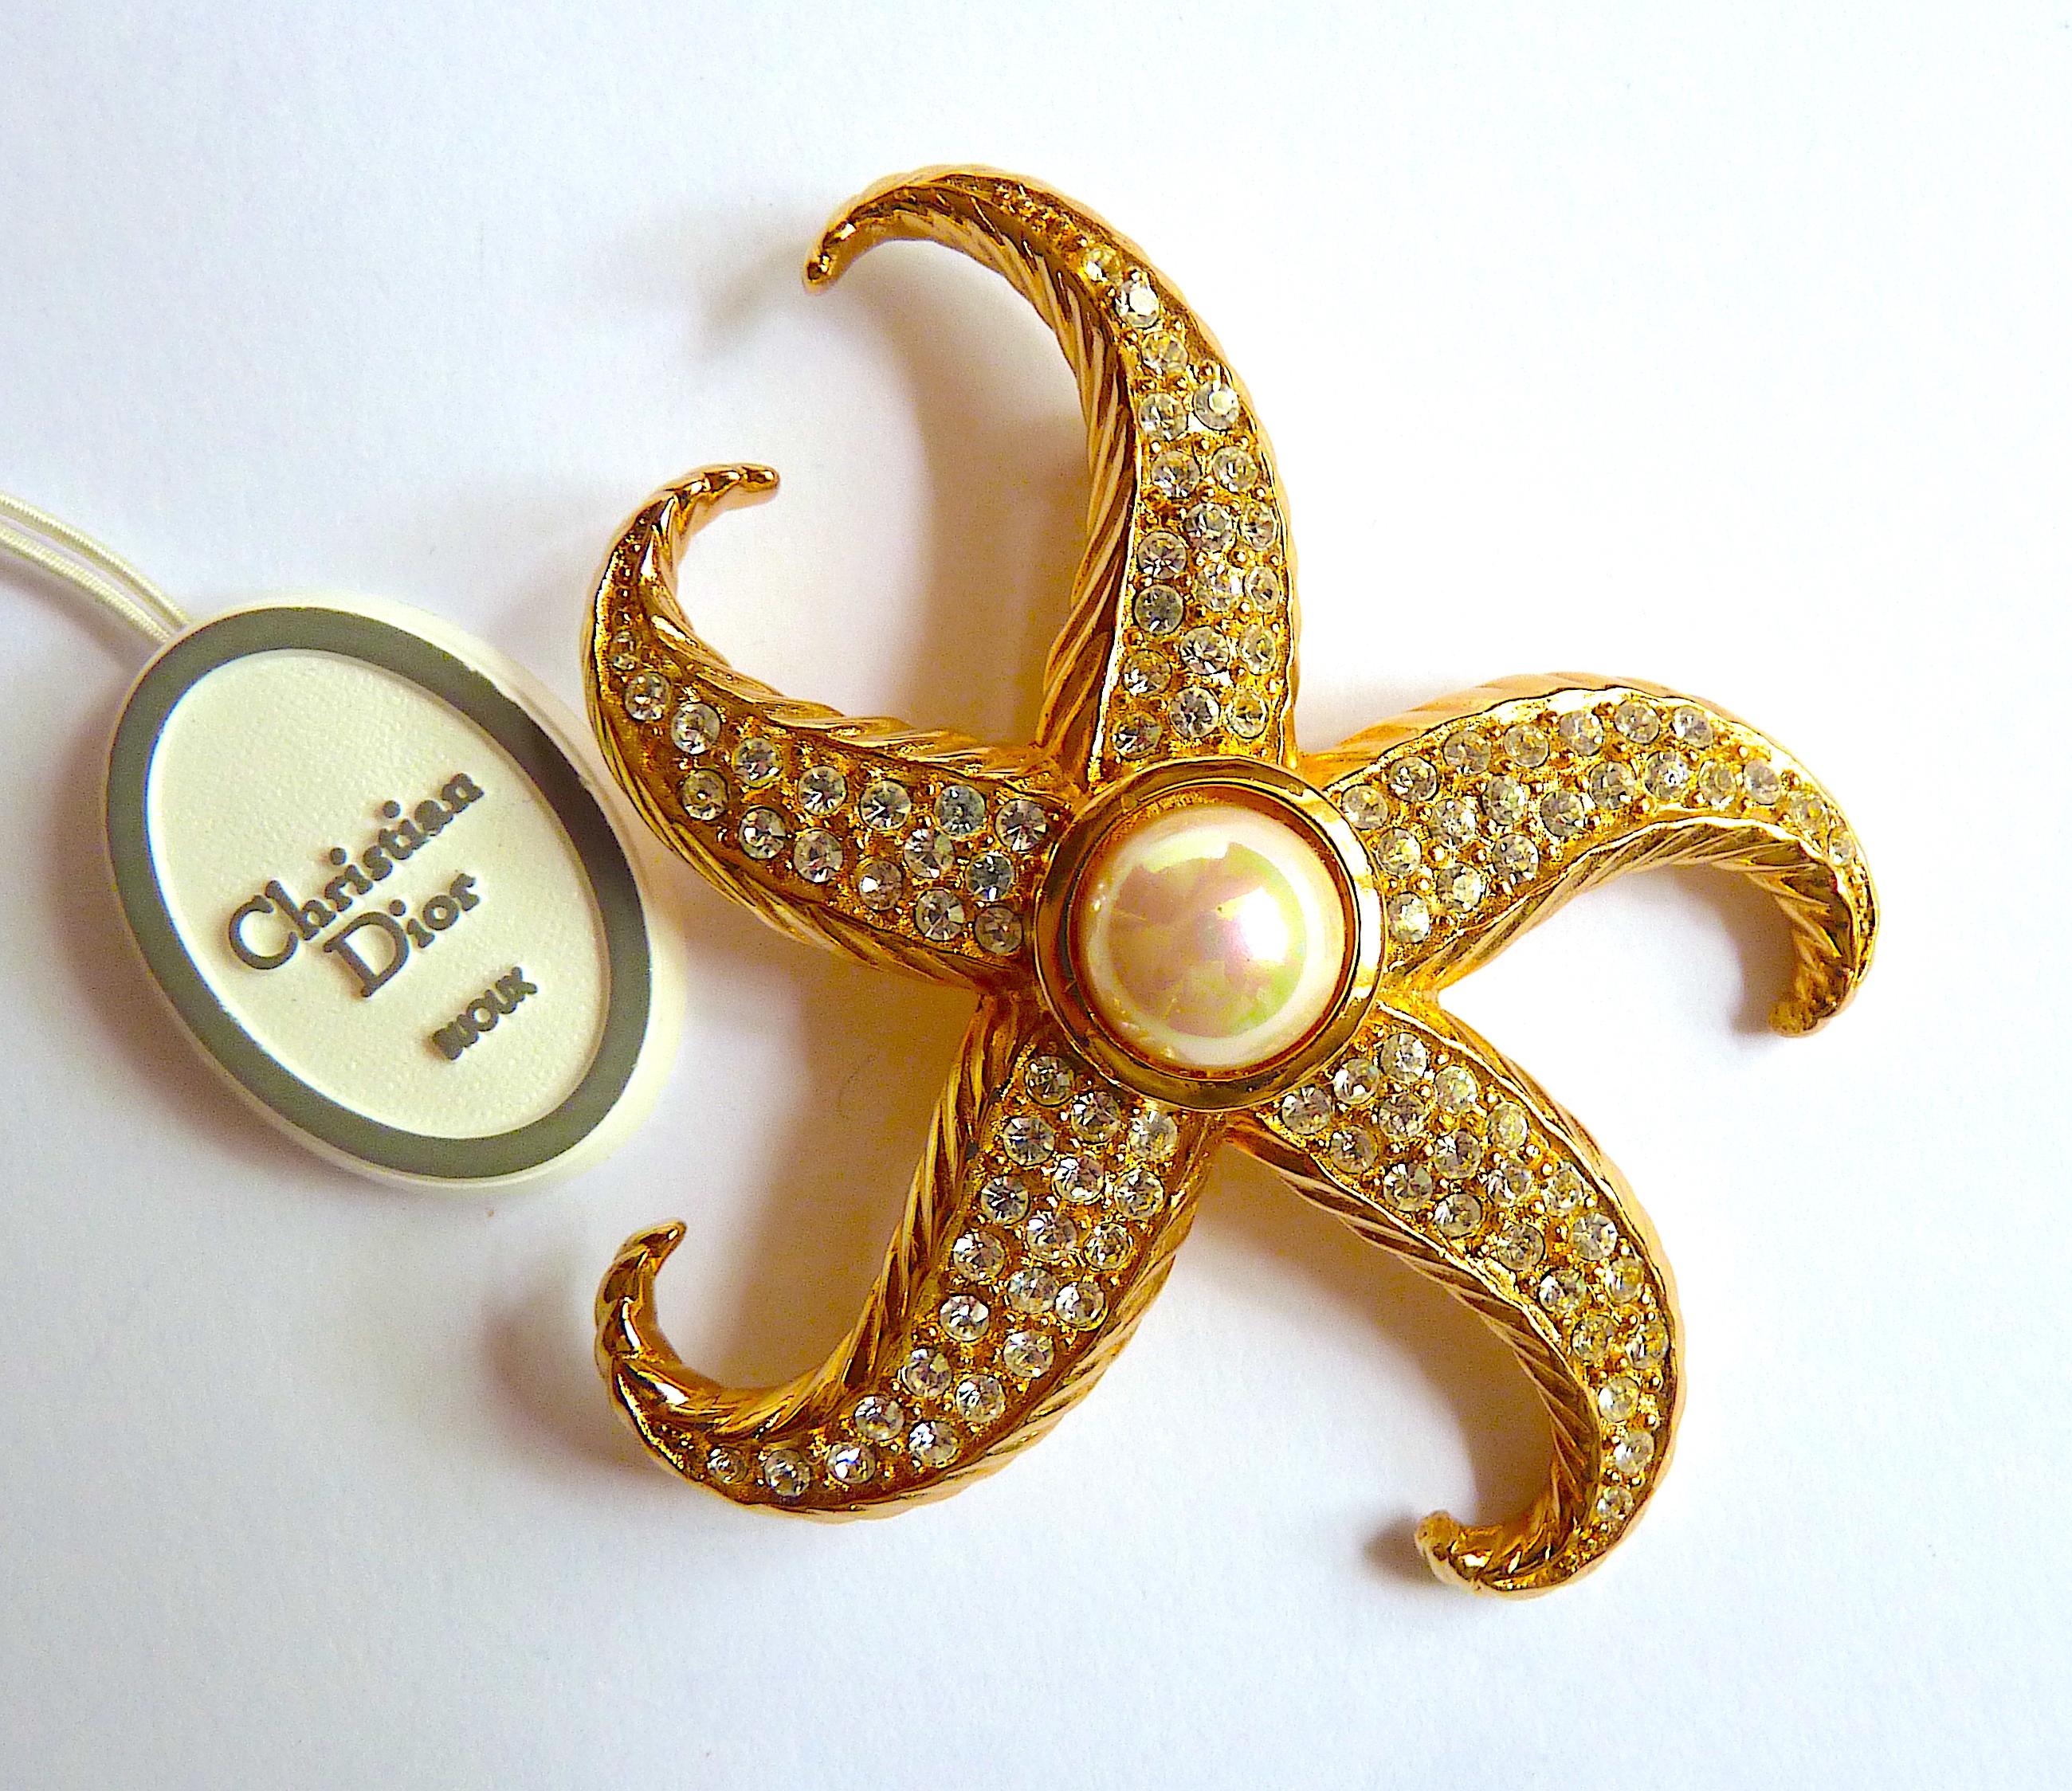 Ultra Rare CHRISTIAN DIOR Brooch, Featuring a Gold Tone Metal Starfish adorned with a White Central Faux Pearl and Clear rhinestones, vintage from the 80's. Highly Collectible Masterpiece and a great addition to your collection !

Vintage from the